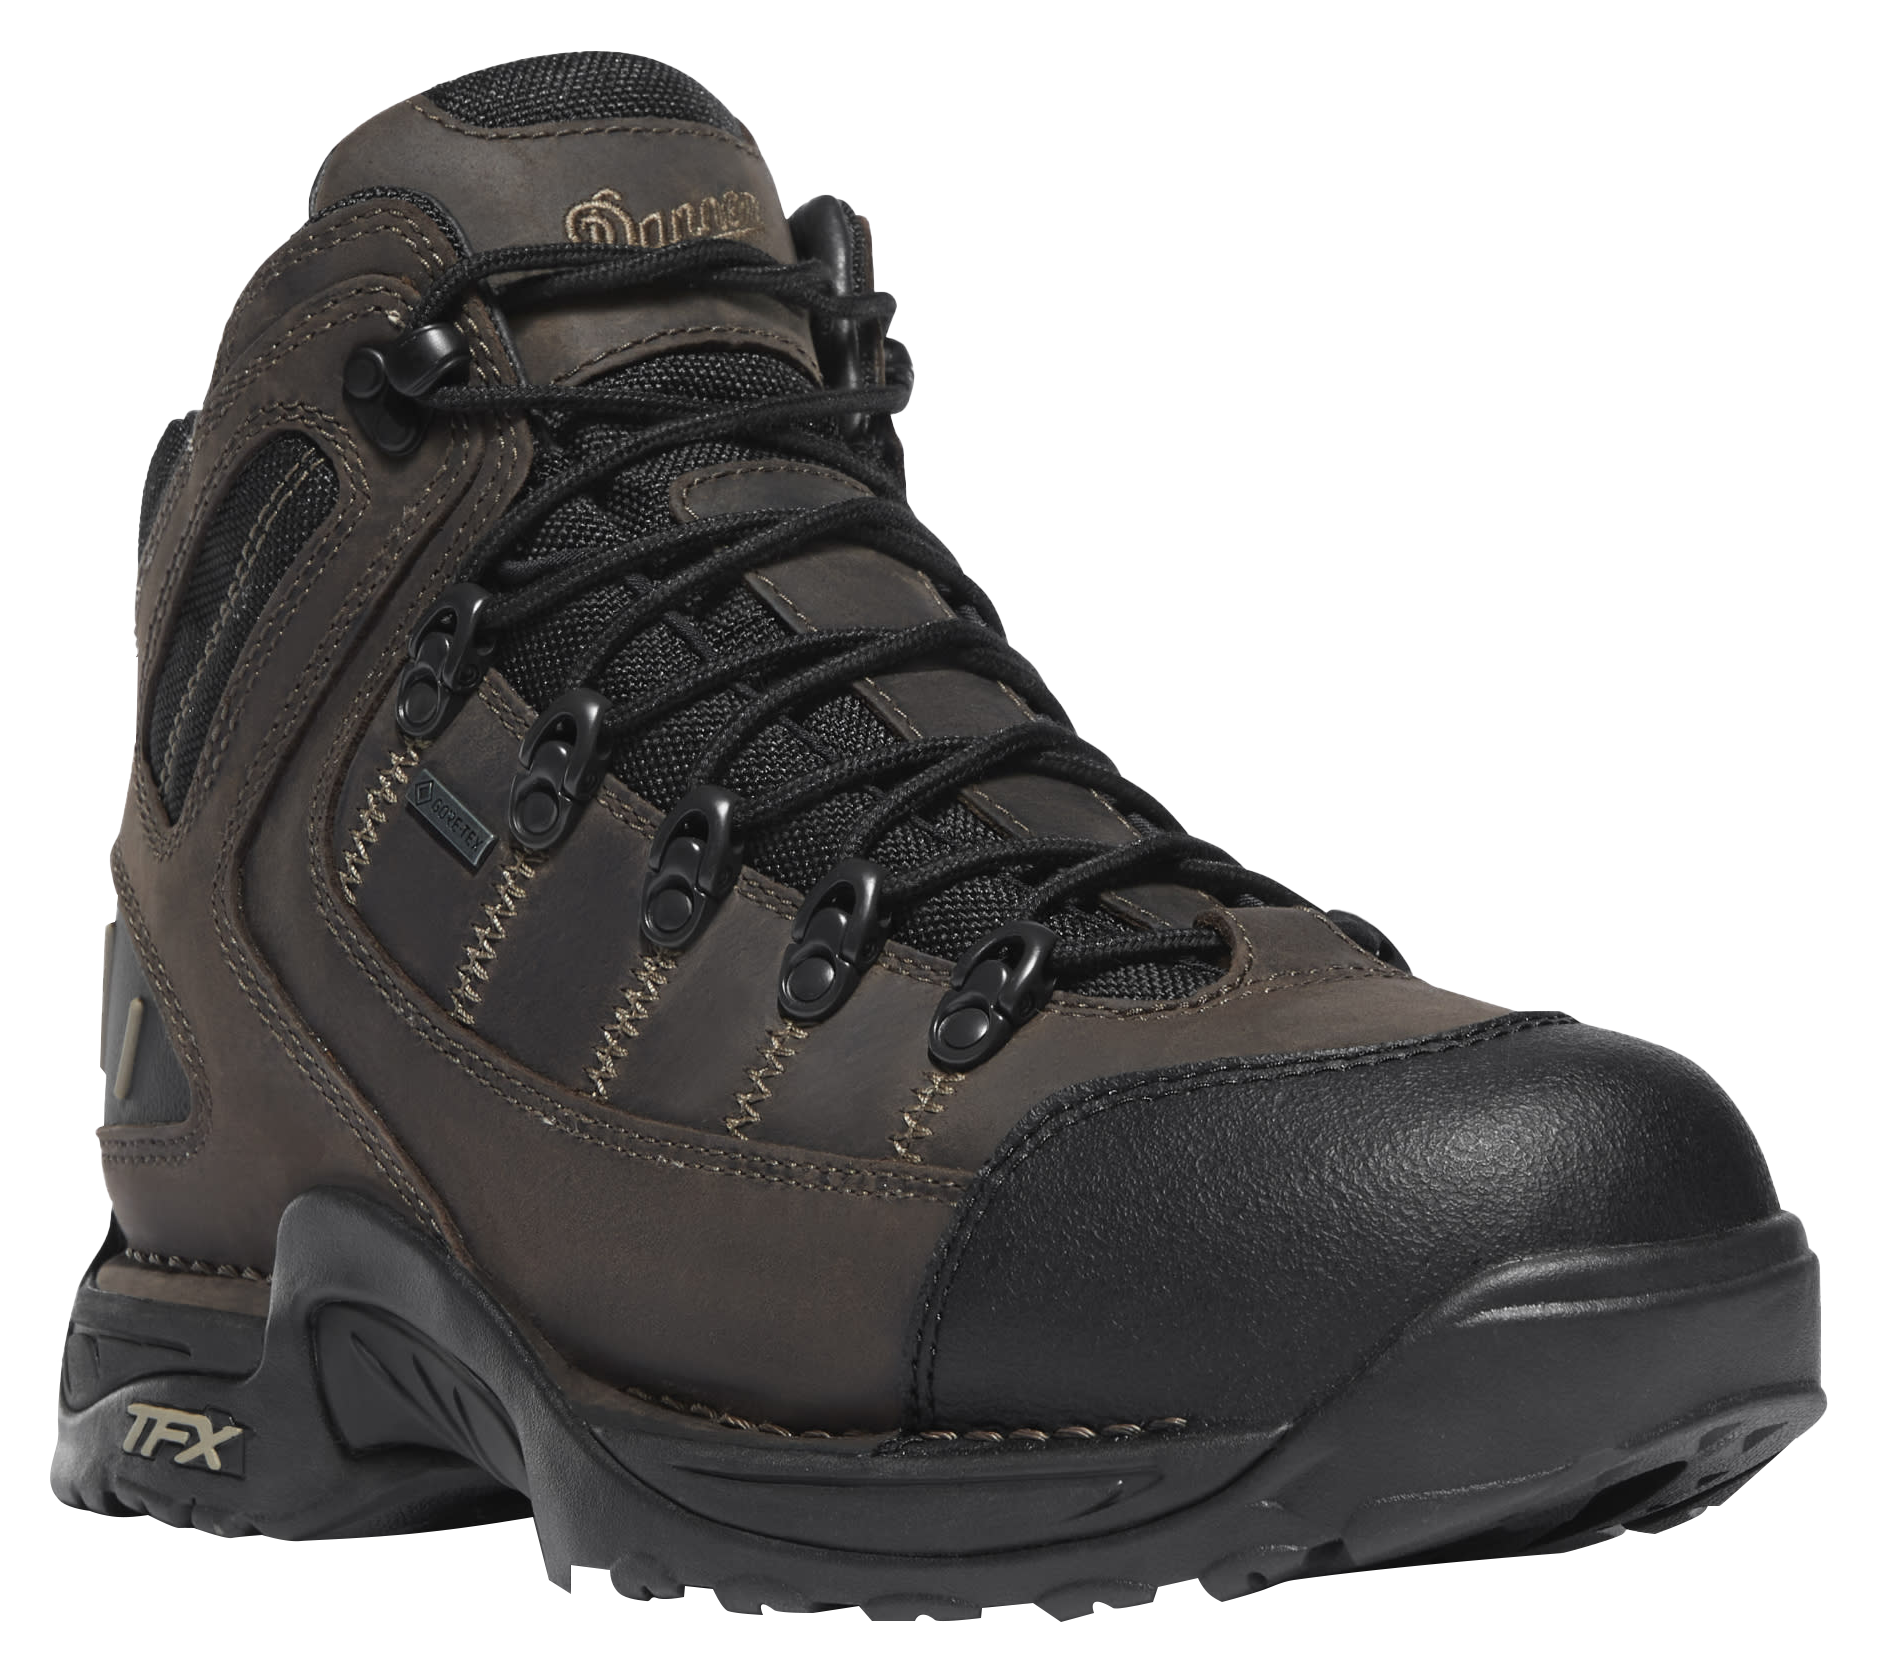 Danner 453 GORE-TEX Waterproof Hiking Boots for Men - Loam Brown/Chocolate Chip - 9.5M